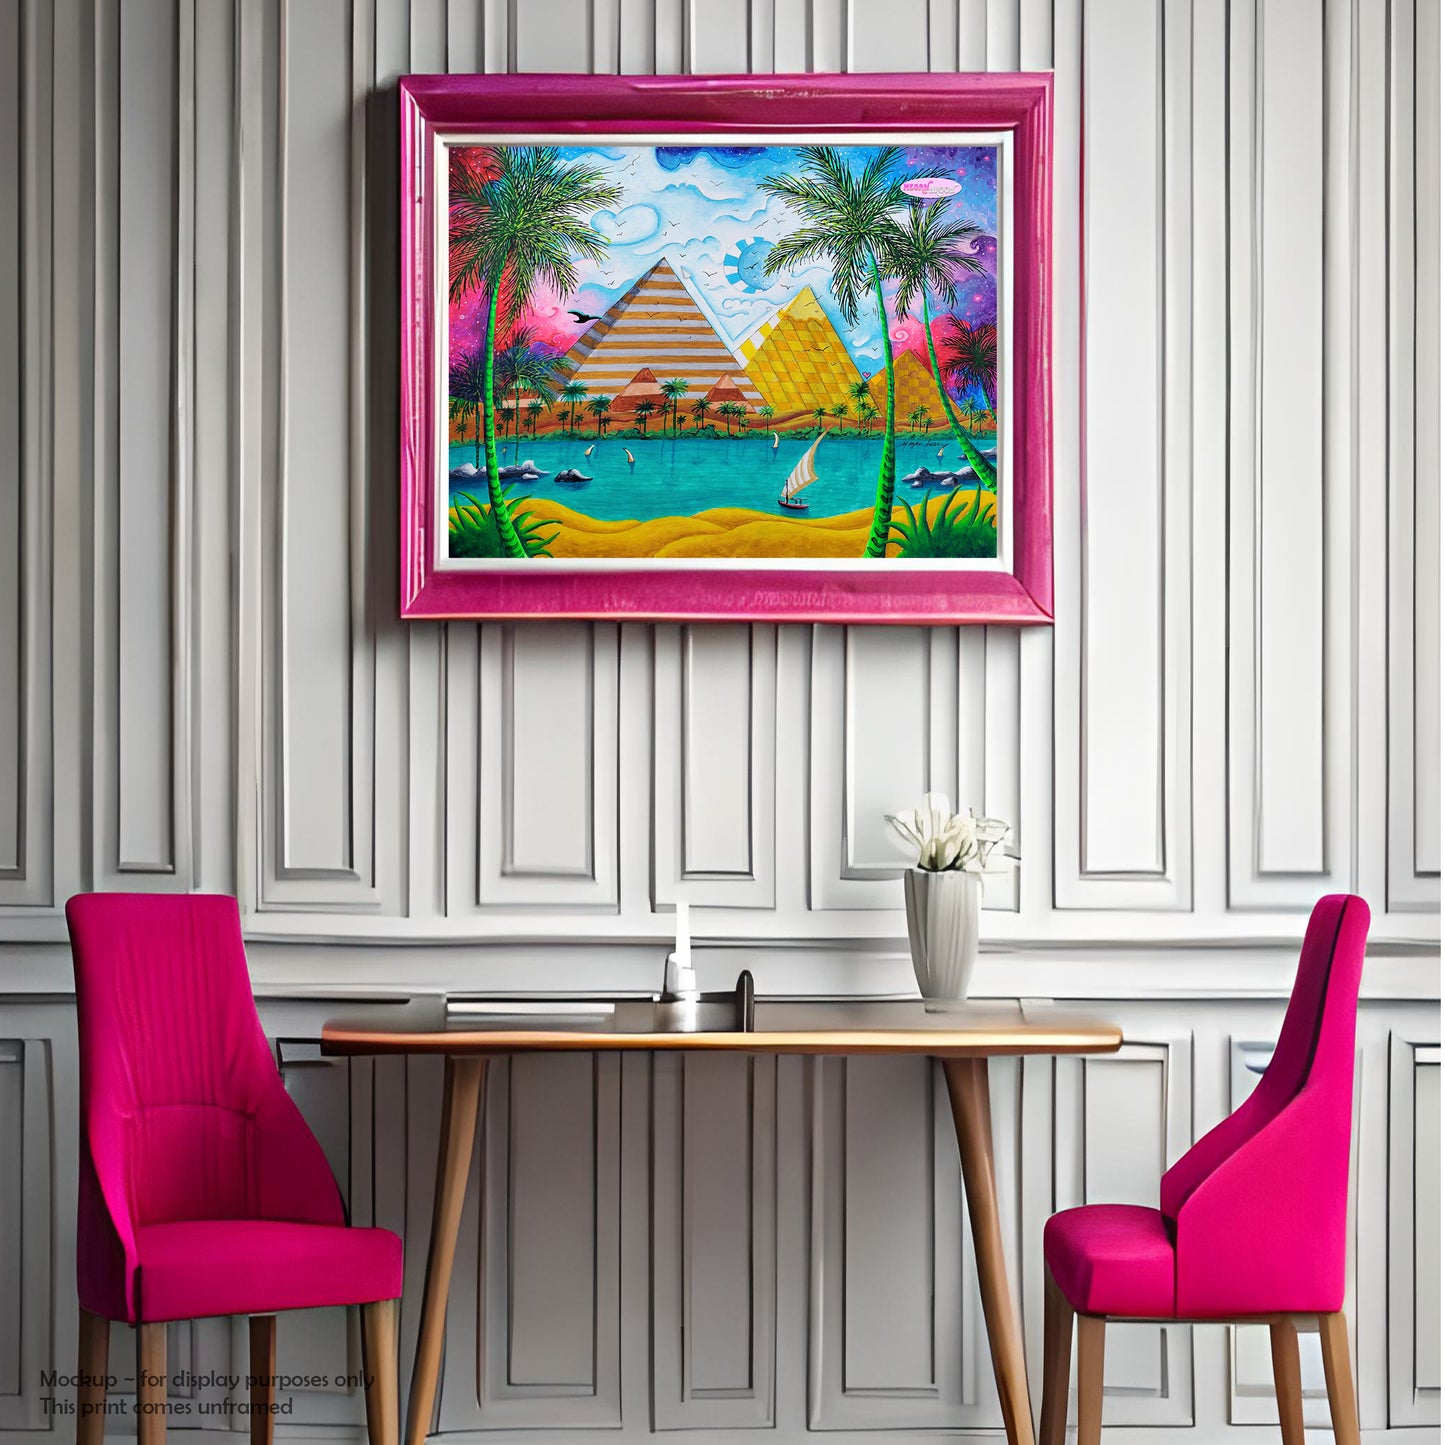 pink frame white walls pink chairs room setting of pyramids of giza travel poster print from original whimsical colorful pop art style painting by traveling artist meganaroon